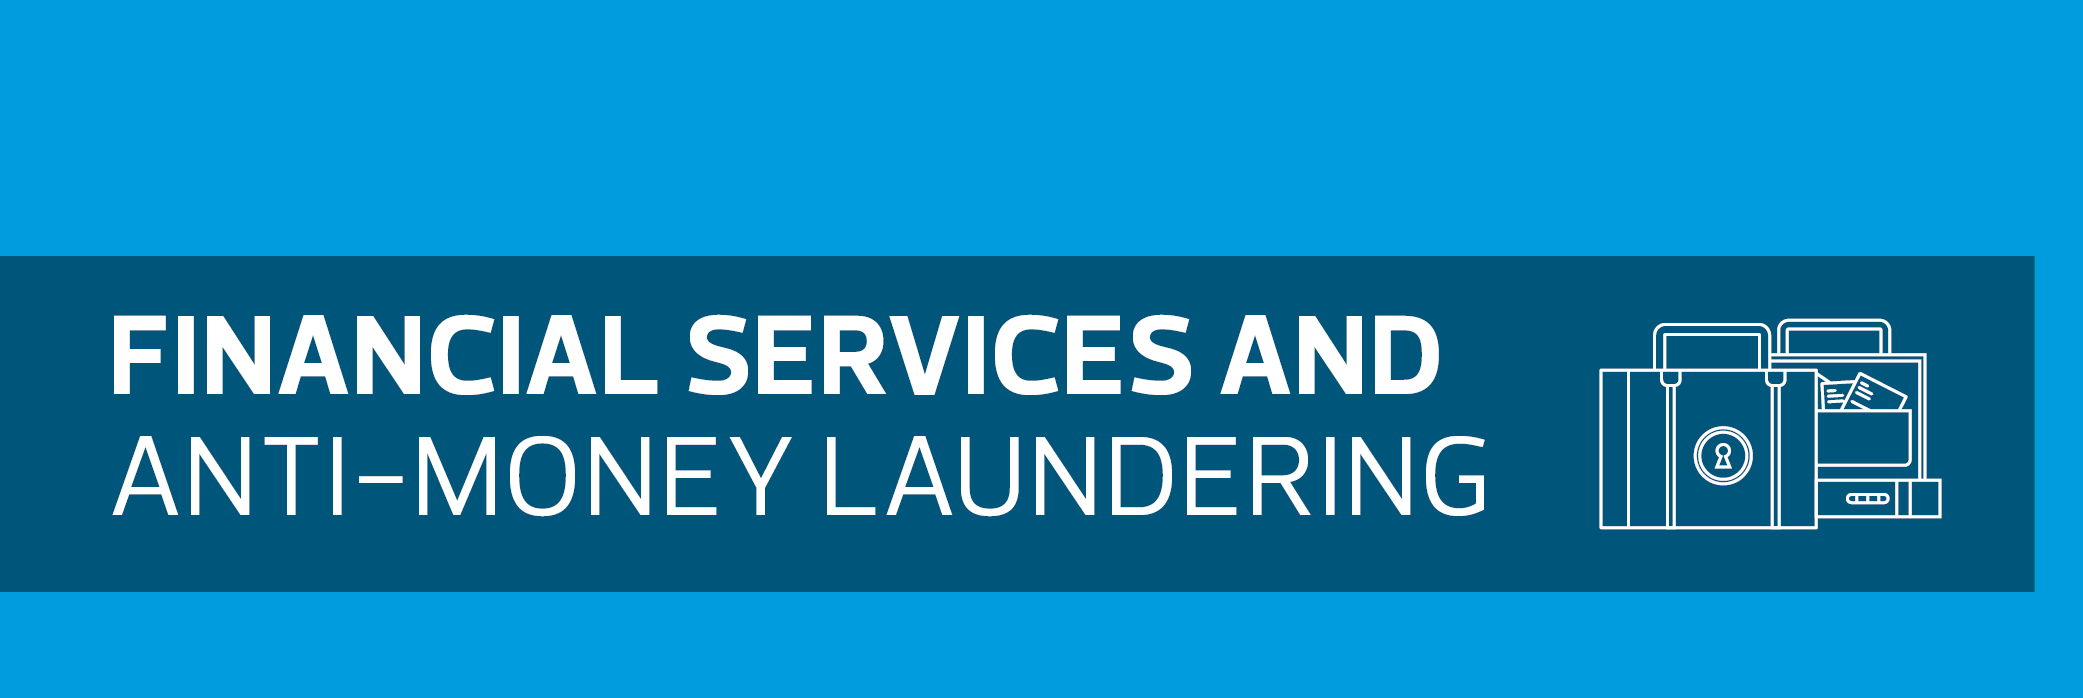 Financial Services and anti-money laundering